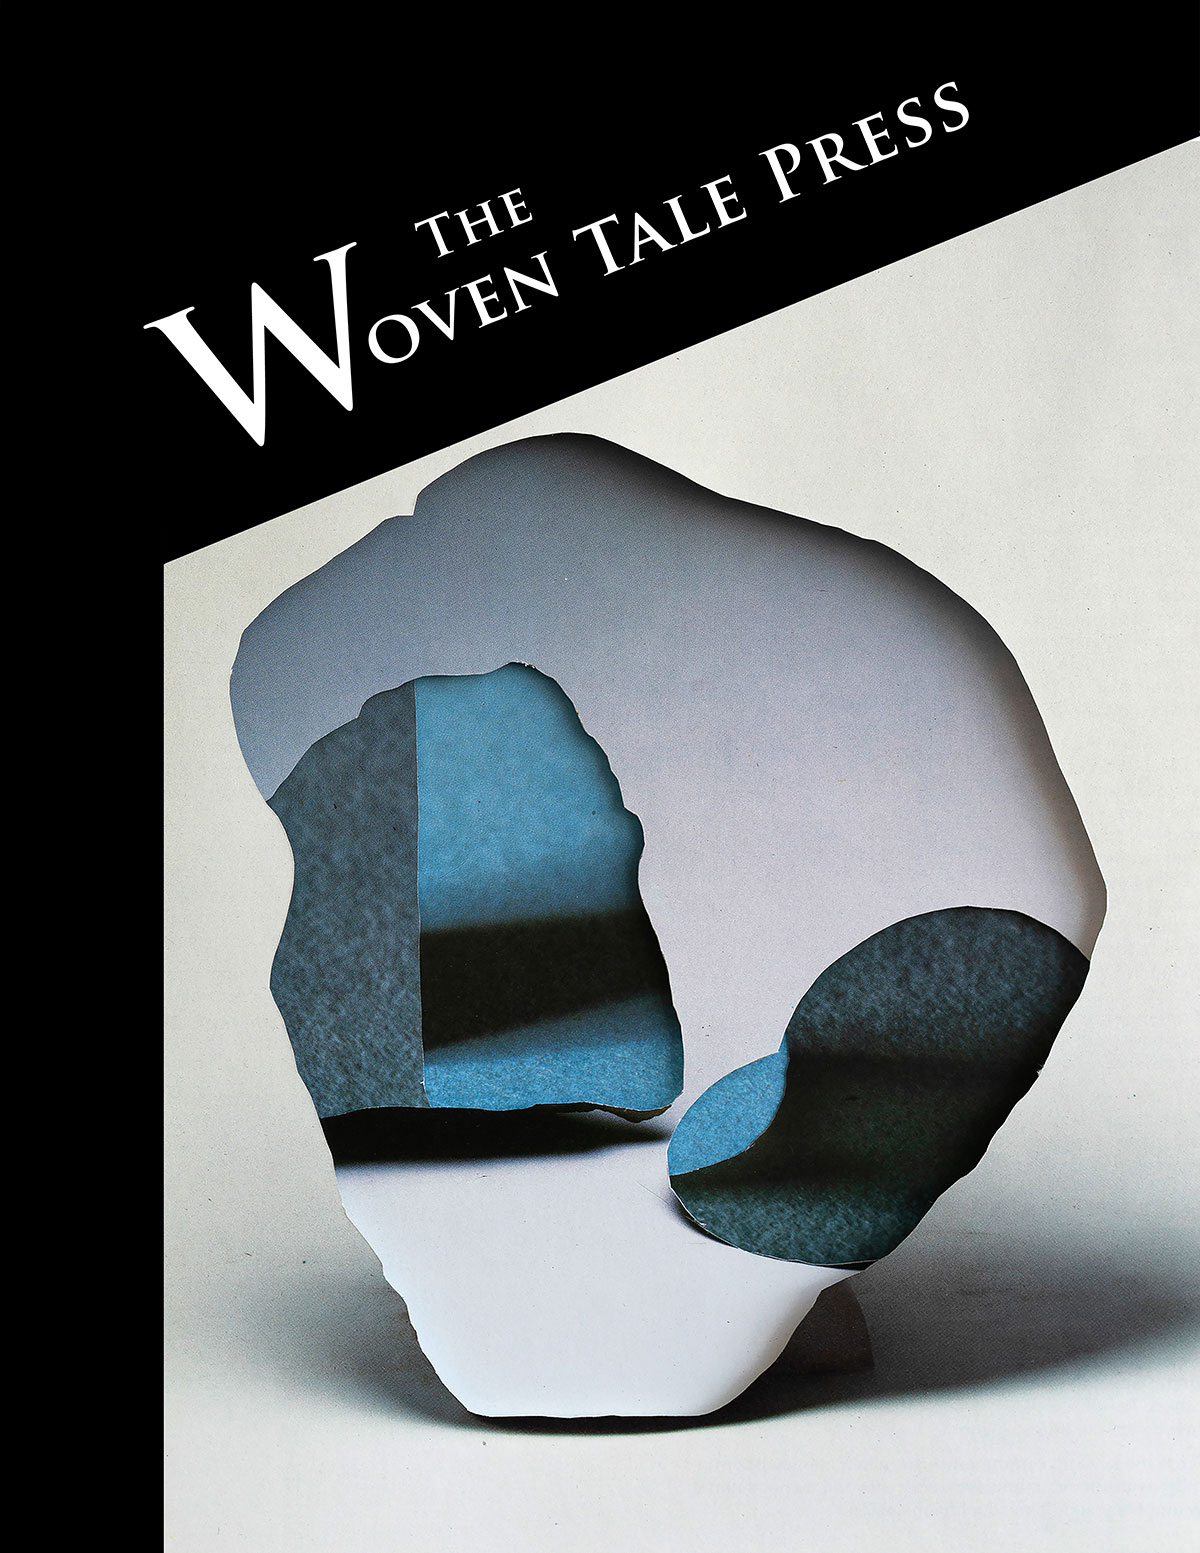 WTP Vol VII #1 with cover art by cover art by Gabriela Vainsencher